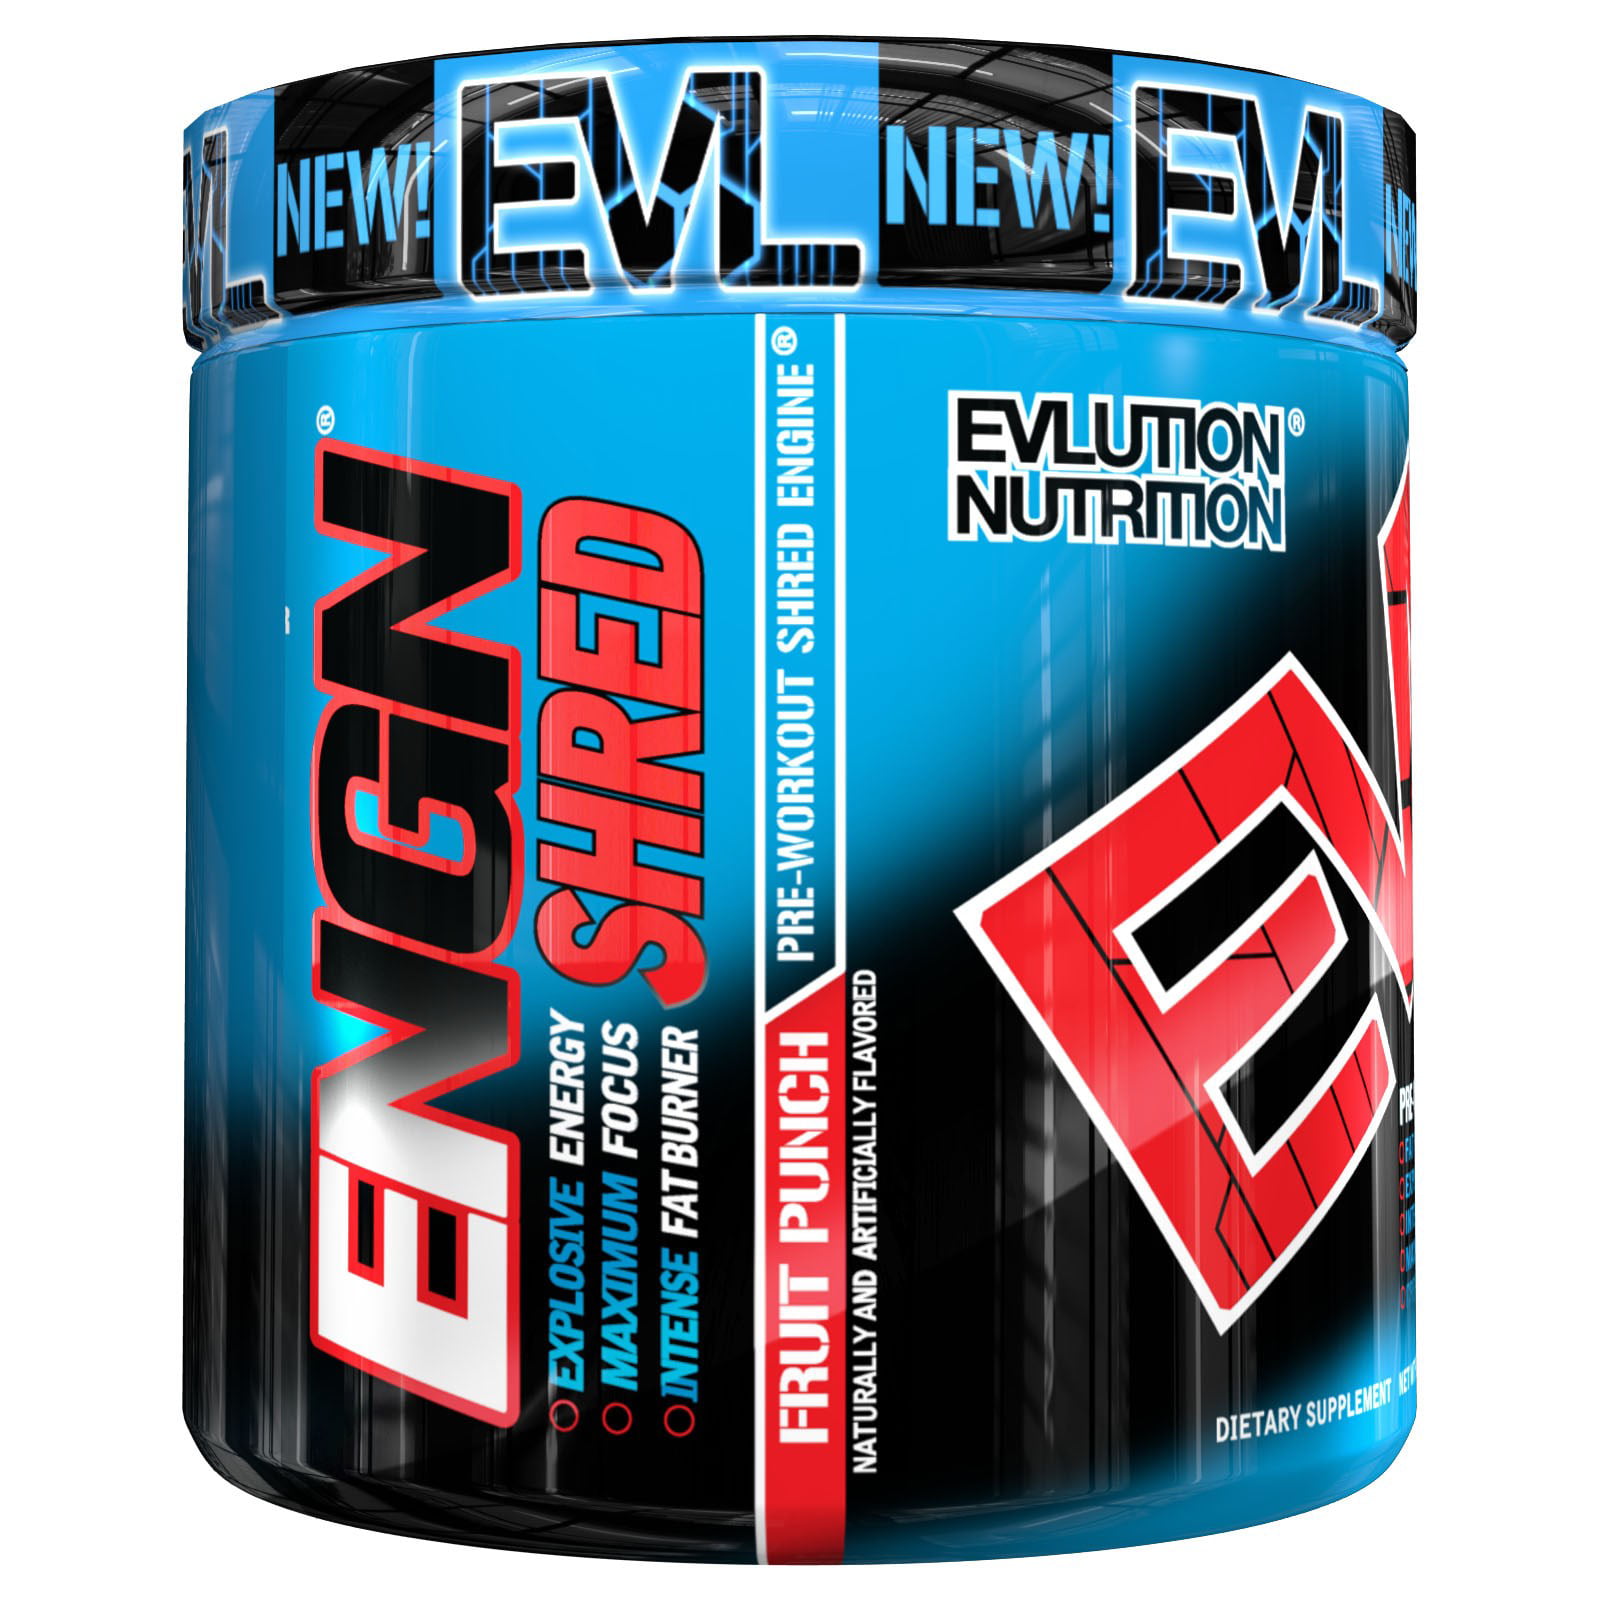 30 Minute Engn shred pre workout review for Women